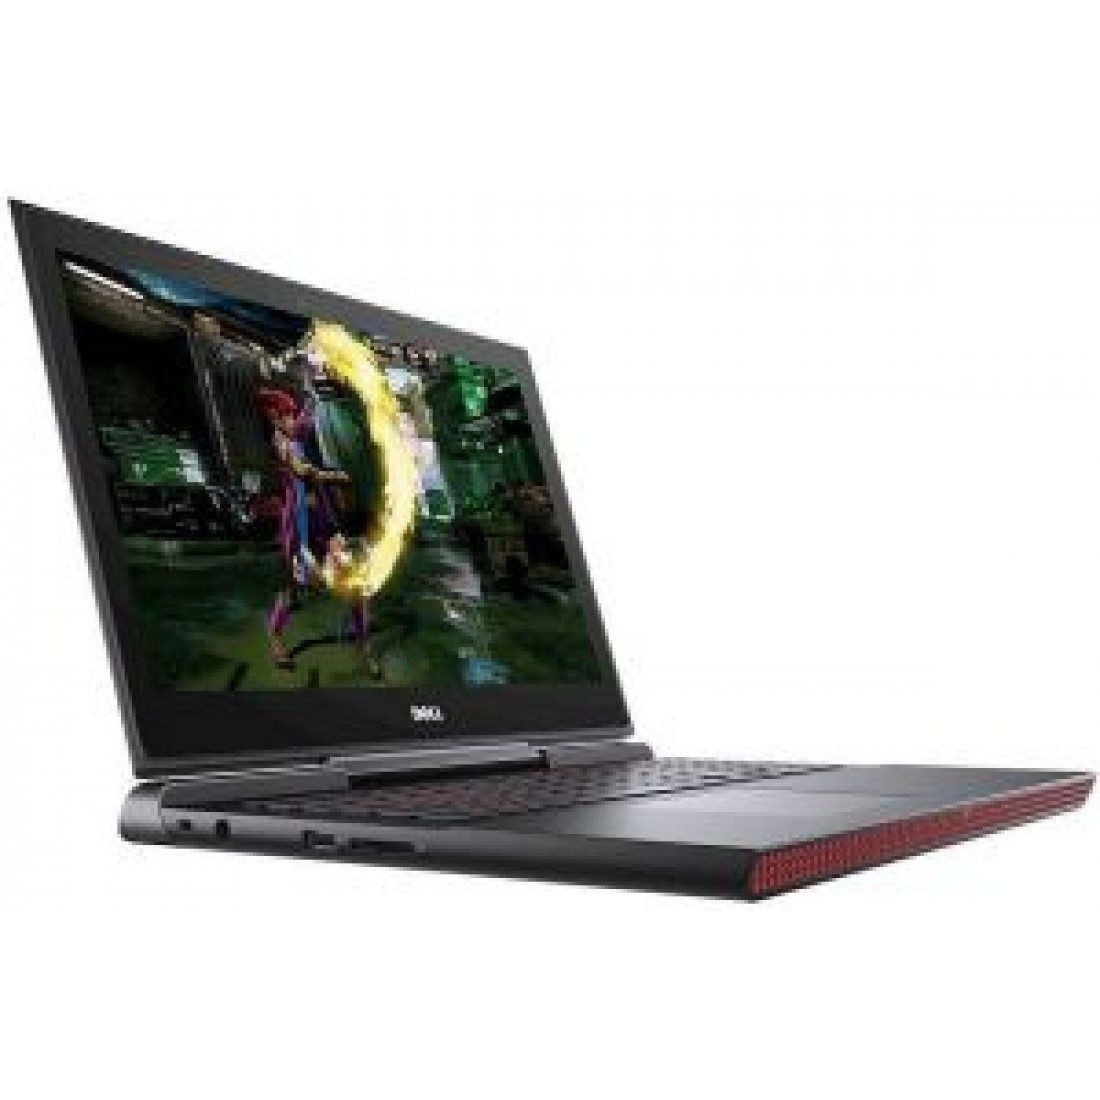 Dell inspiron 15 gaming. Ноутбук dell Inspiron 7567. Игровой ноутбук dell Inspiron 7567. Ноутбук dell Inspiron 15 7567. Dell Inspiron 15 7000.